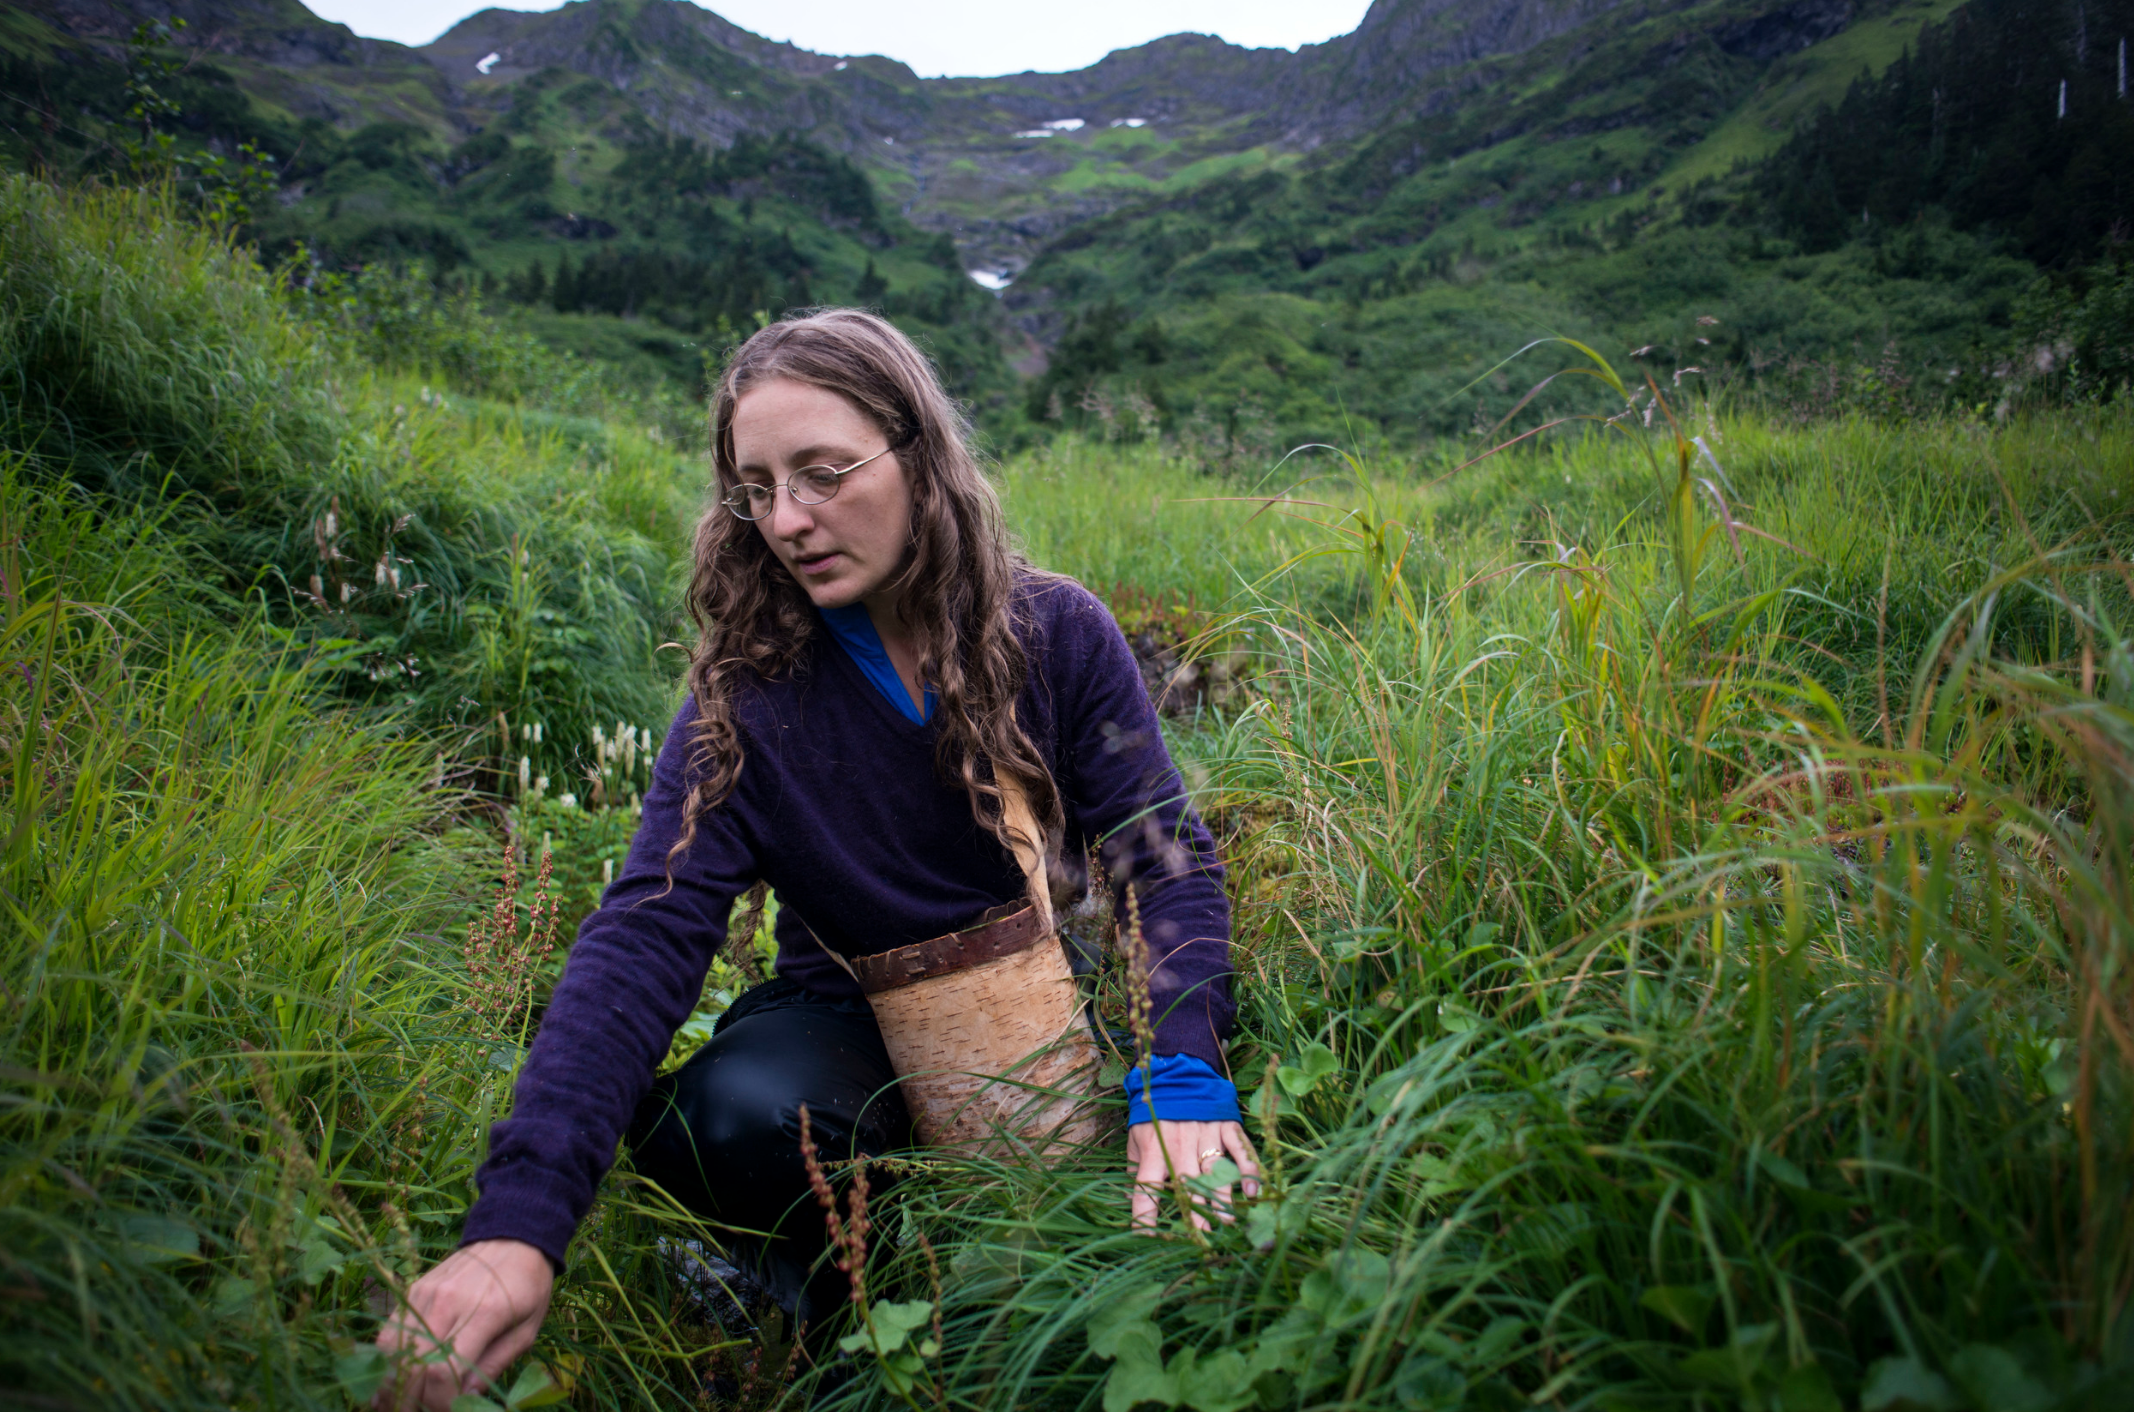  CORDOVA, AK. Meadow harvests sorrel in the mountains near her home. She lives a subsistence lifestyle, using only food she or her neighbors grow and harvest from the land around them to feed her family. 